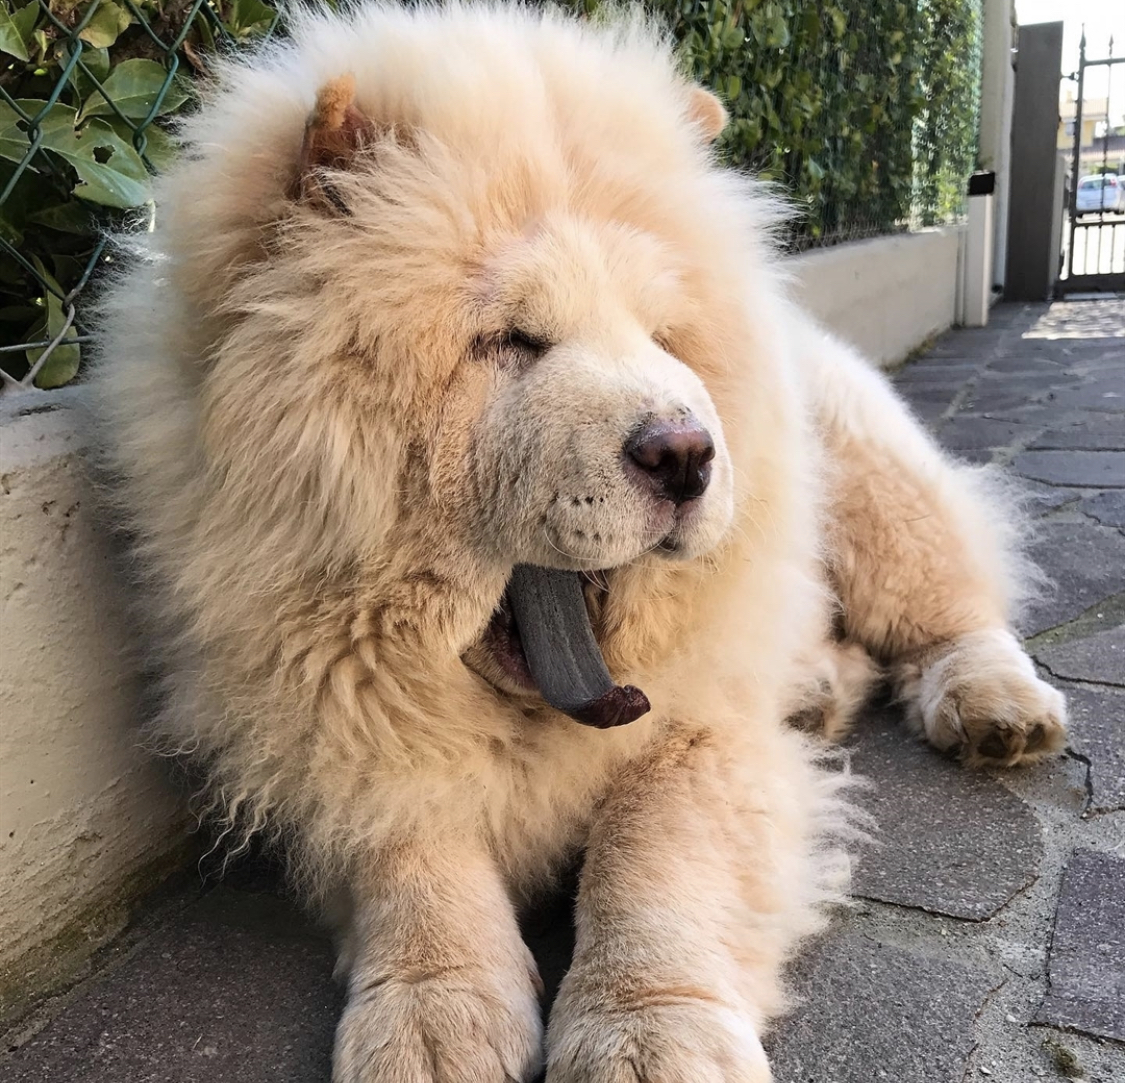 A Chow Chow lying on the pavement while yawning